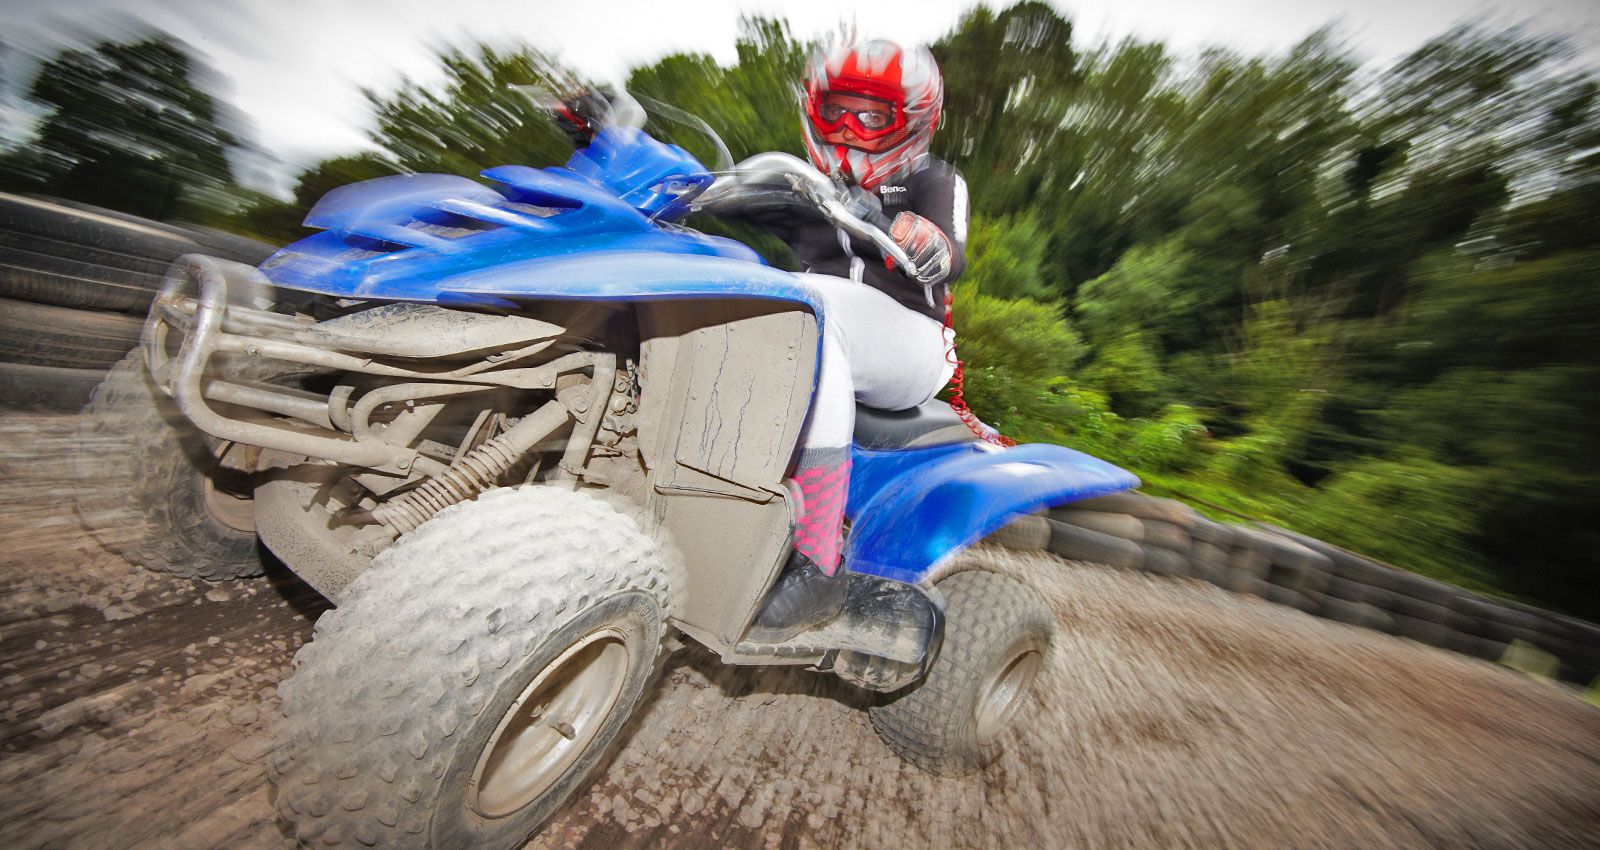 PGL Adventure Holidays - Specialist Holidays and Summer Camps for 7-17 year olds - Action and Adventure - Wet & Wild, Mission Spy, Motorsports, Xtreme Adventure, Motorsports Pro, Adrenaline Adventure, Indiana Jones, Explorer